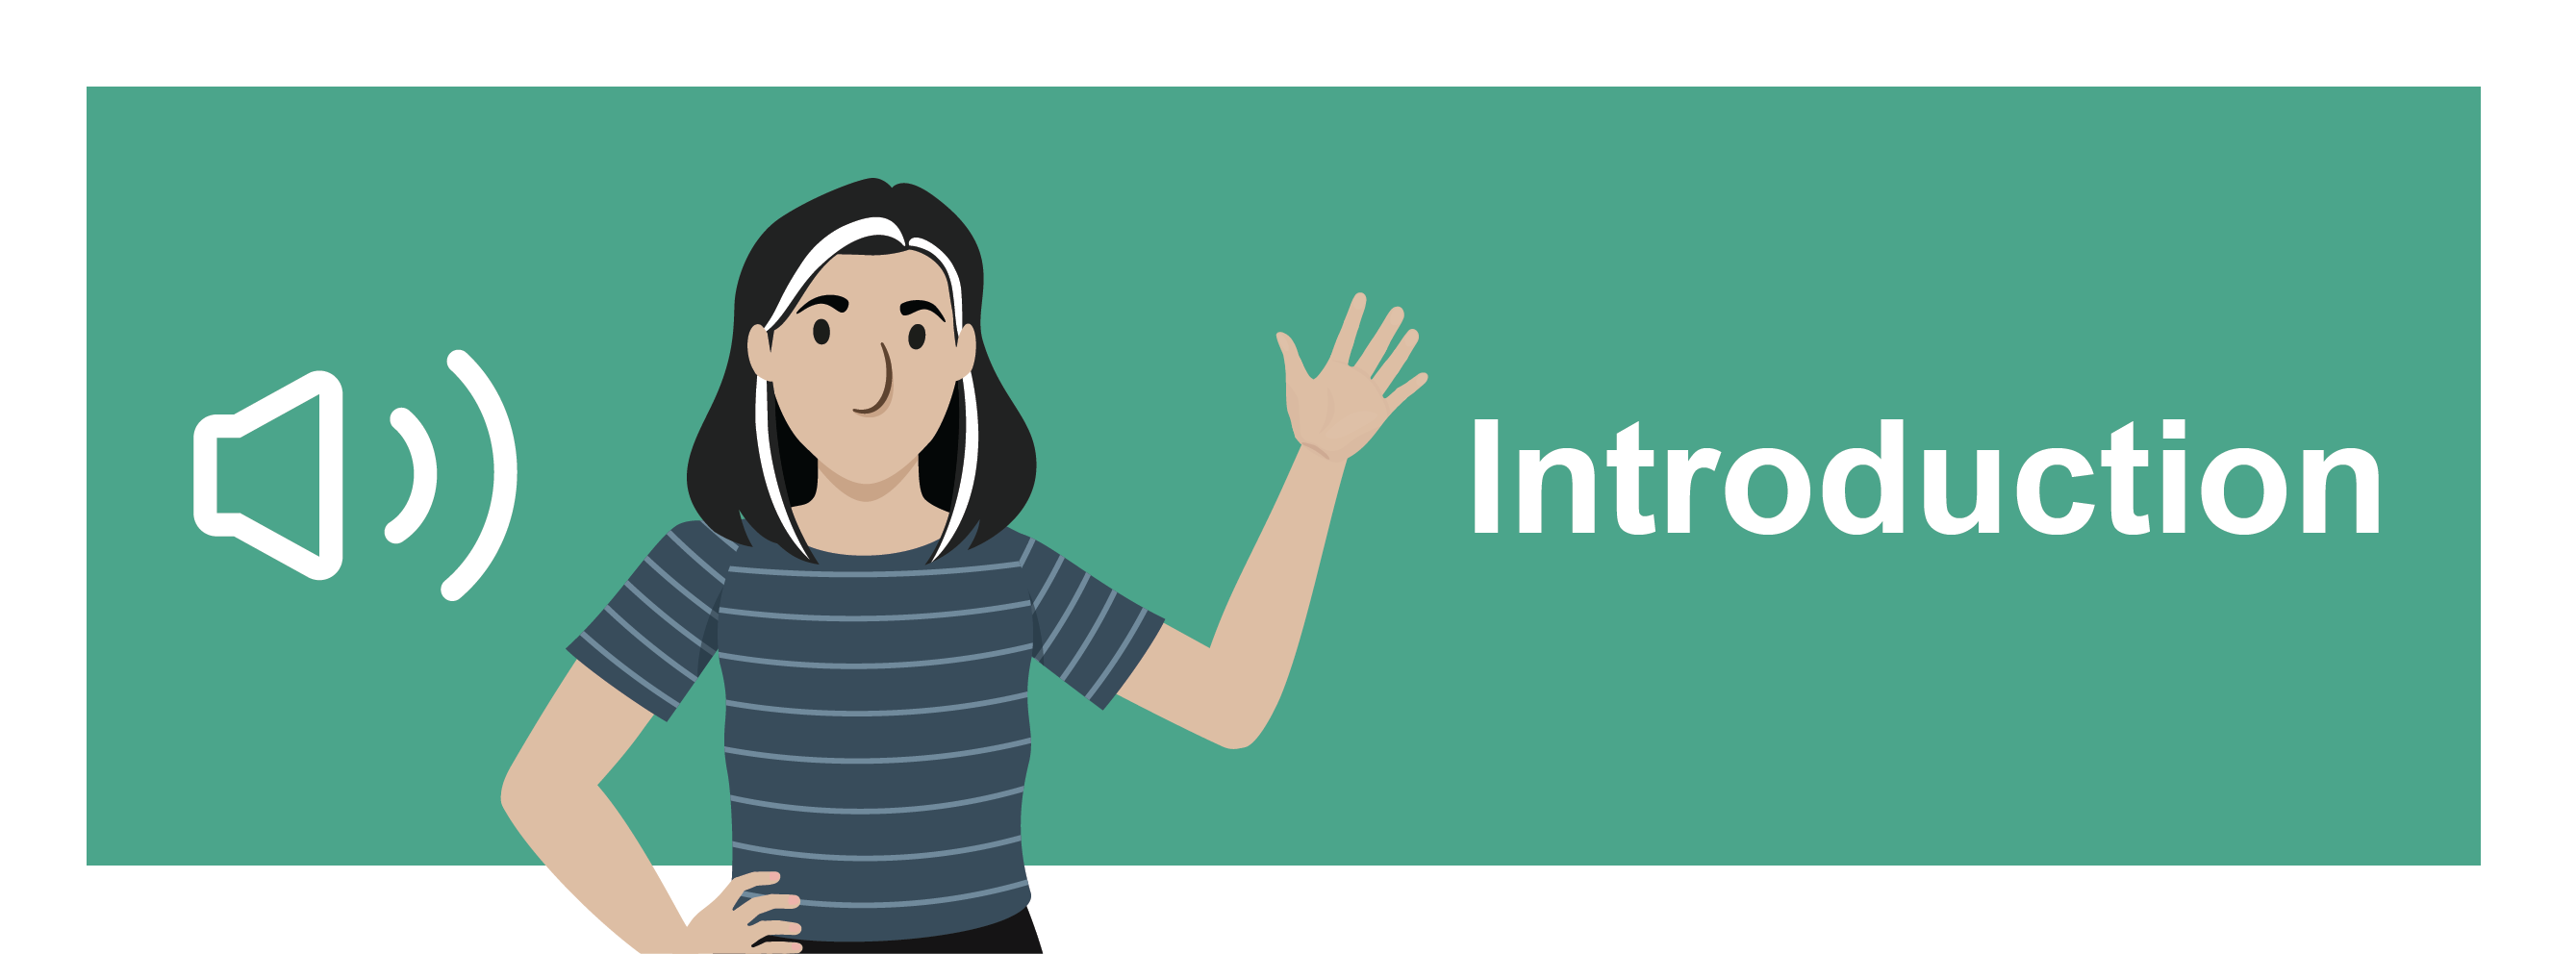 Introduction Training (Beginner - Audio Enabled)